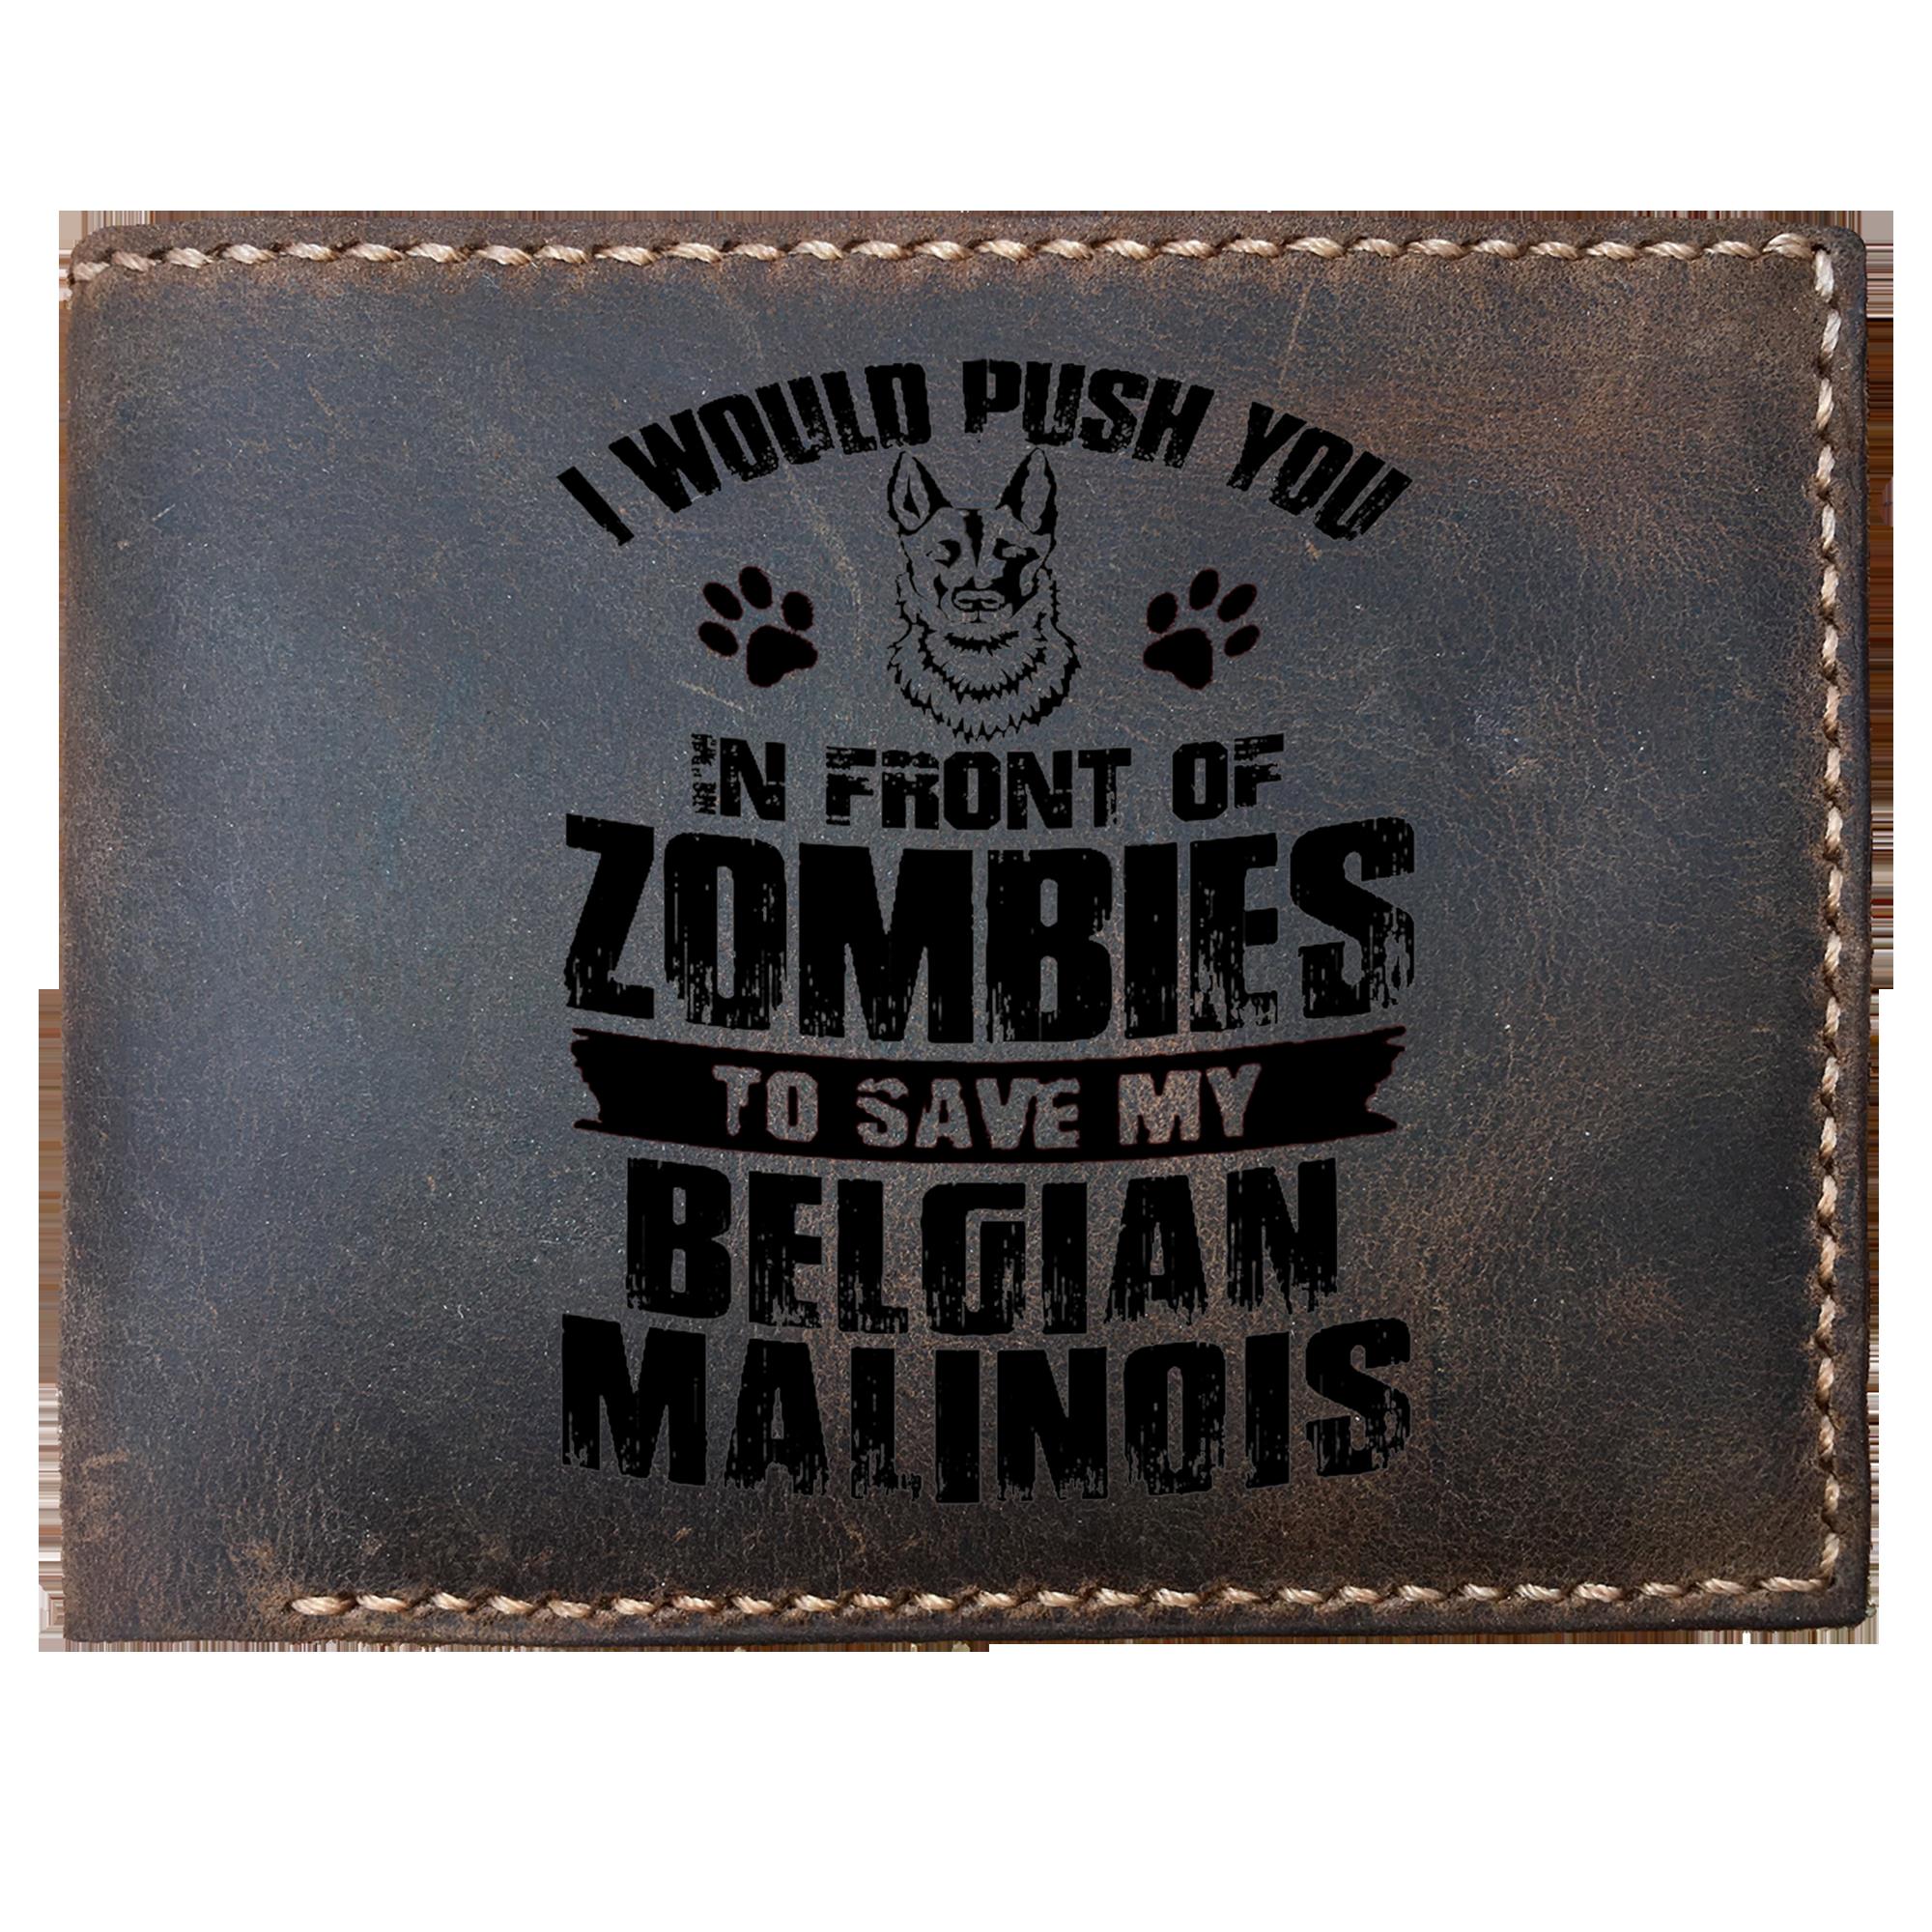 Skitongifts Funny Custom Laser Engraved Bifold Leather Wallet For Men, I Would Push You In Front Of Zombied To Save My Belgian Malinois